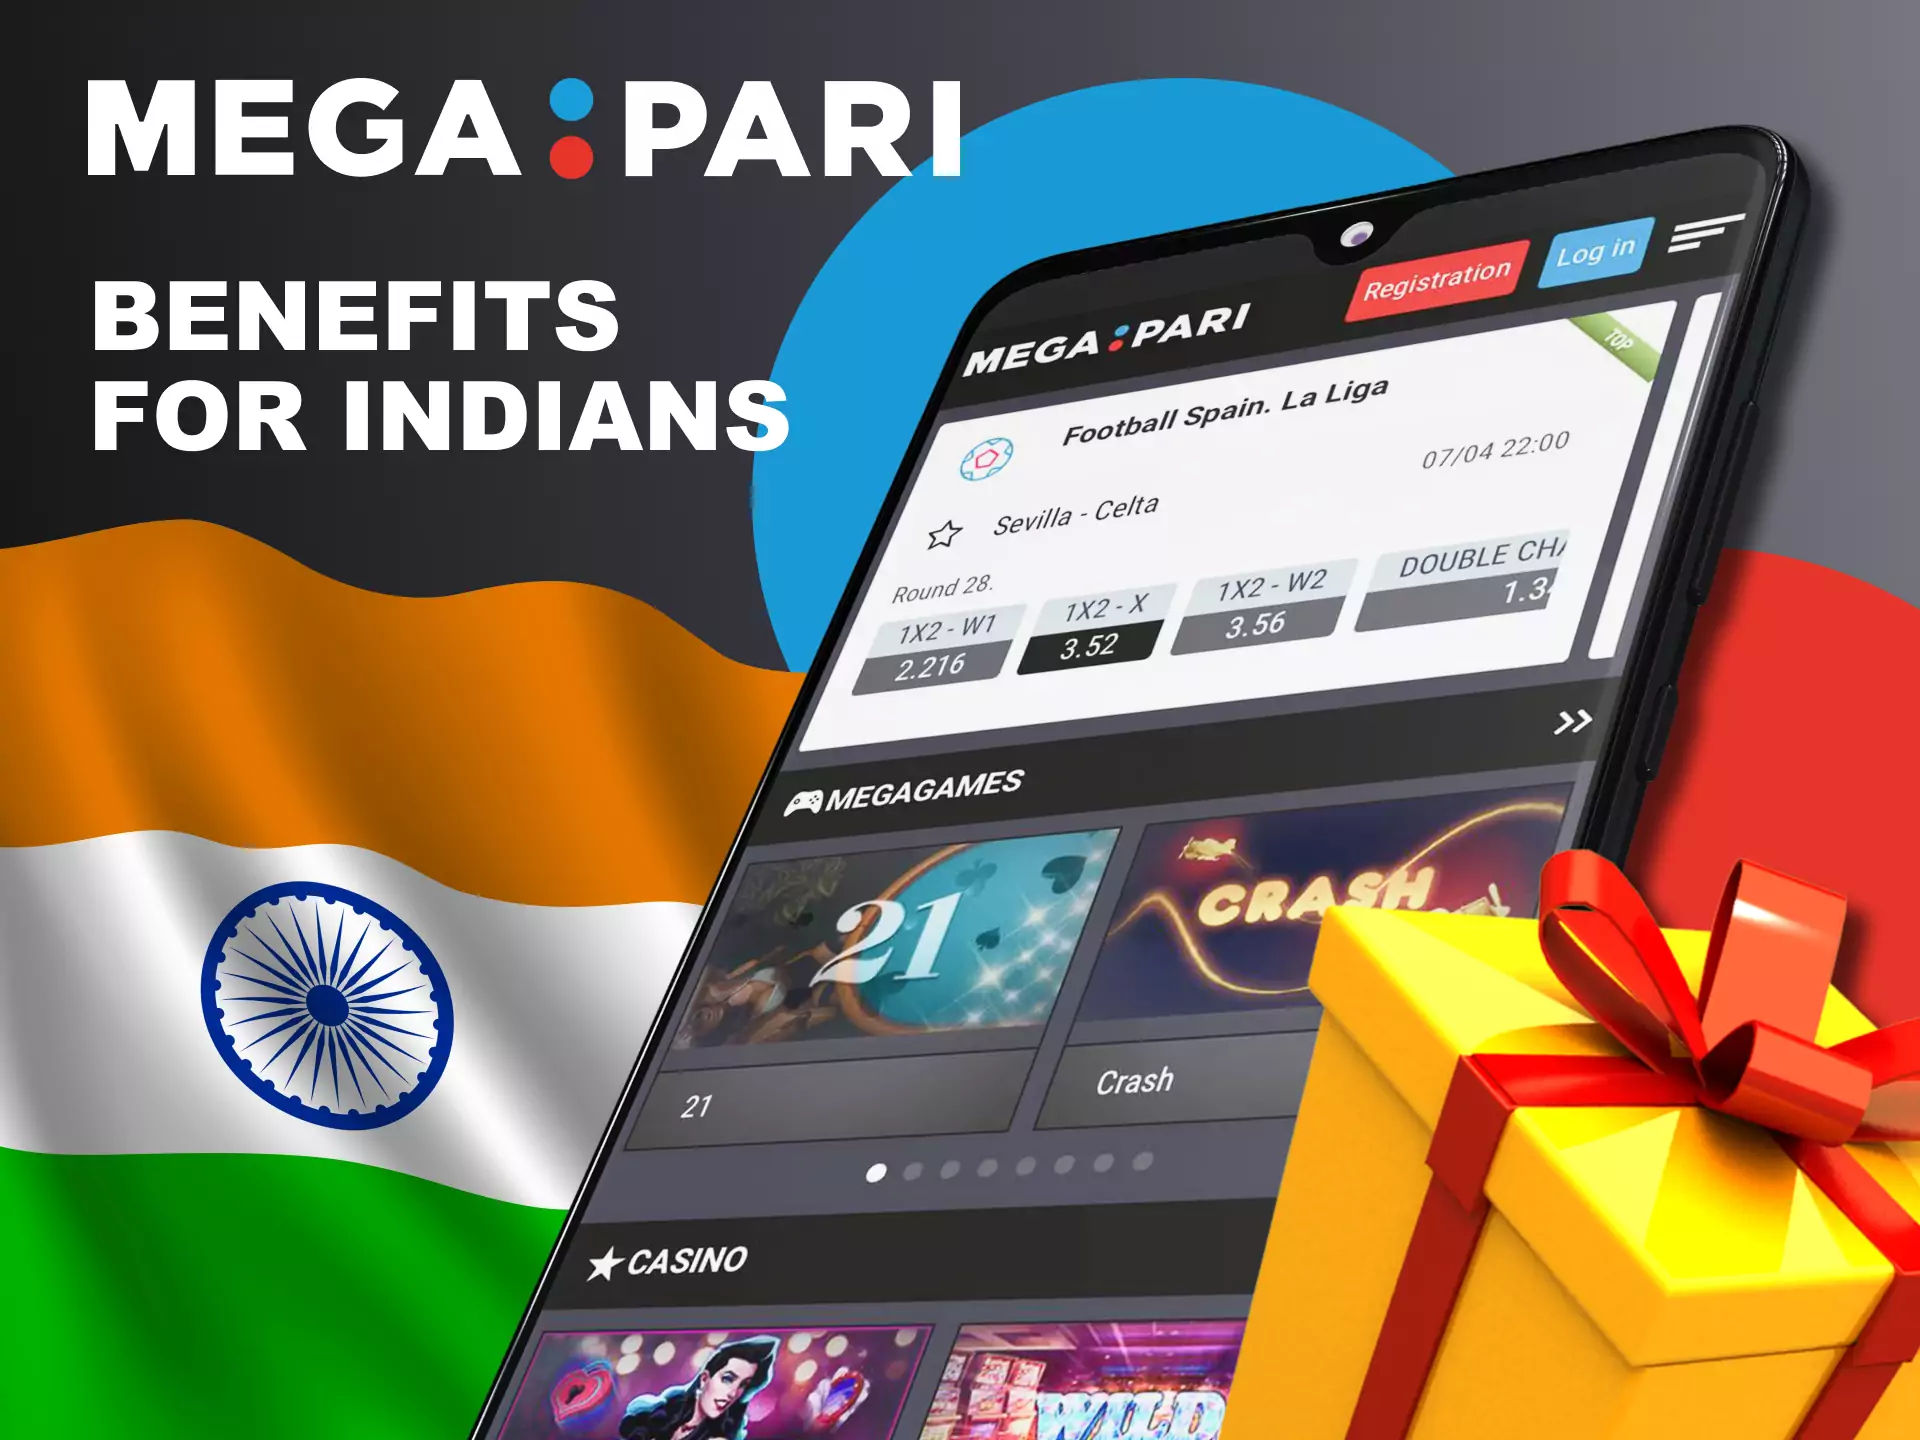 The Megapari app offers its Indian players many bonuses and benefits.